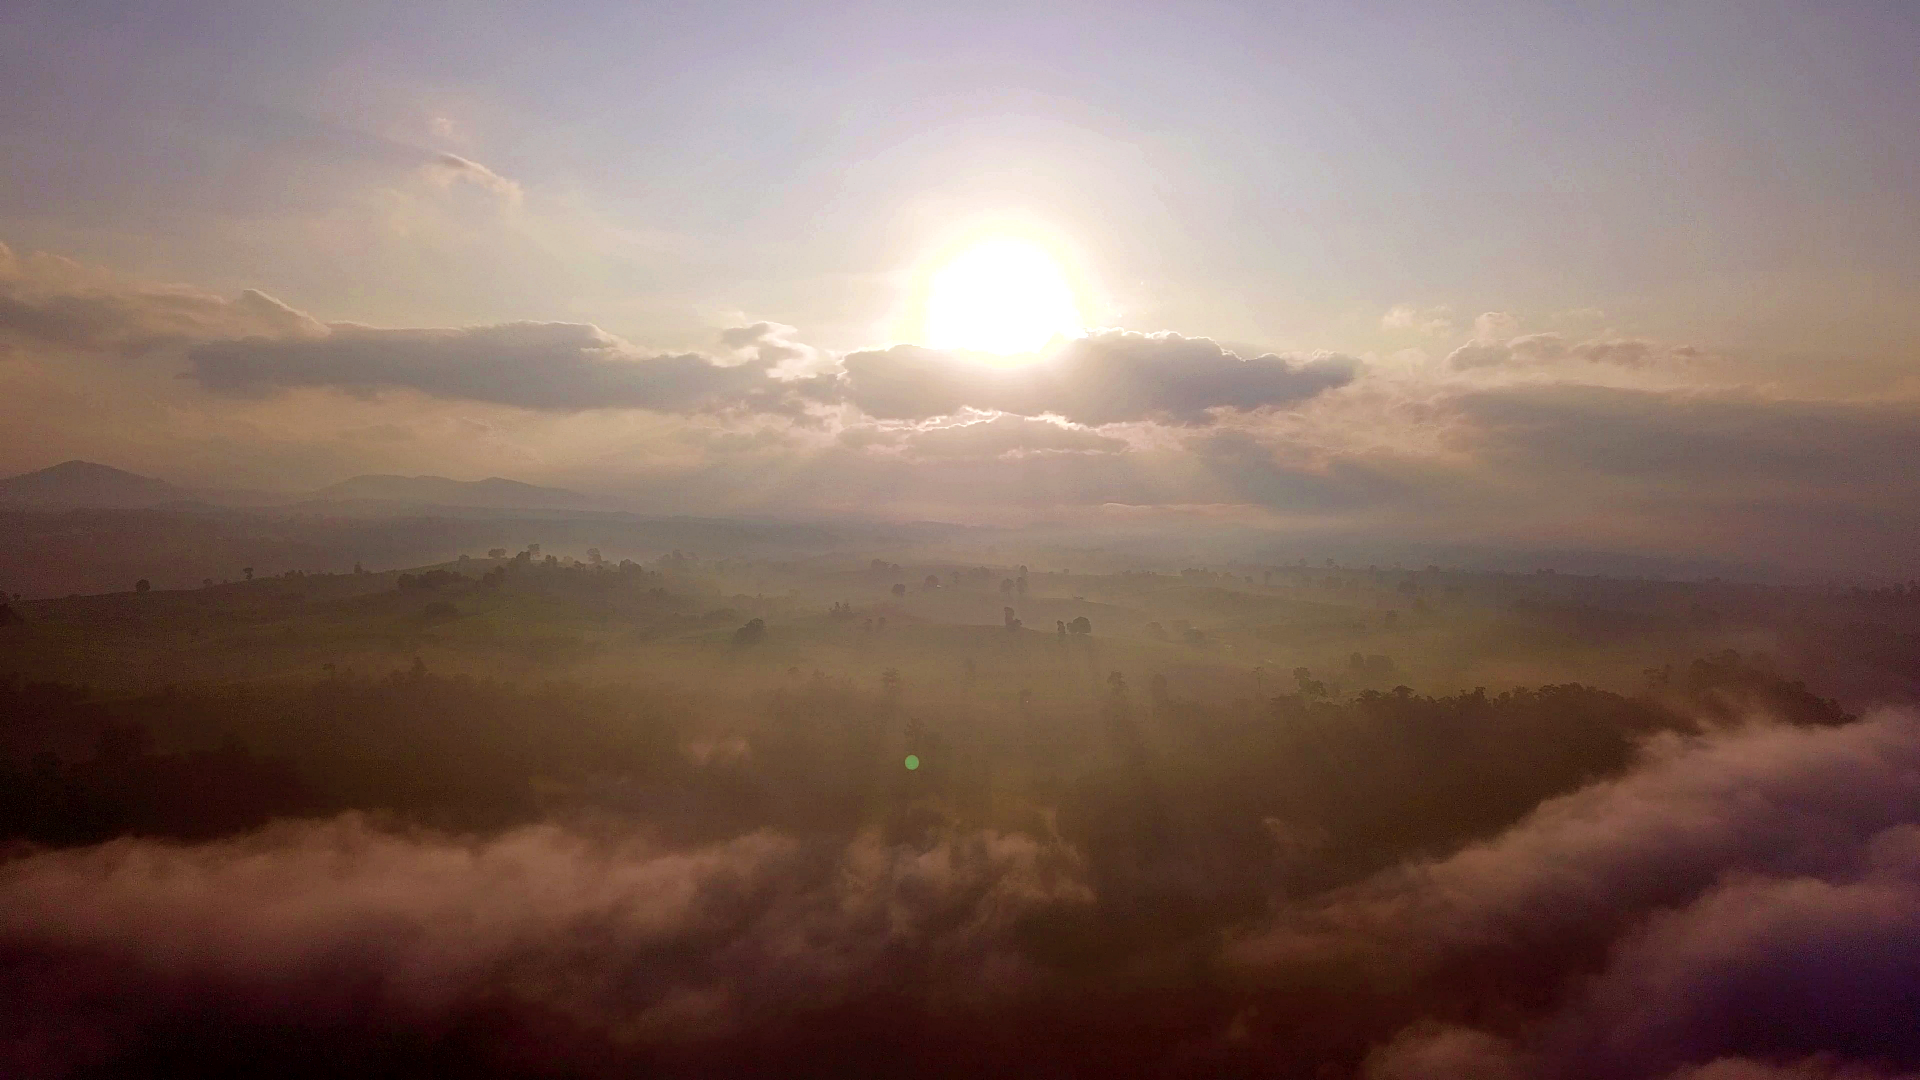 [ Thailand ] 🌞 Sunrise in 4K on the hilly landscape of Phop Phra 🌄